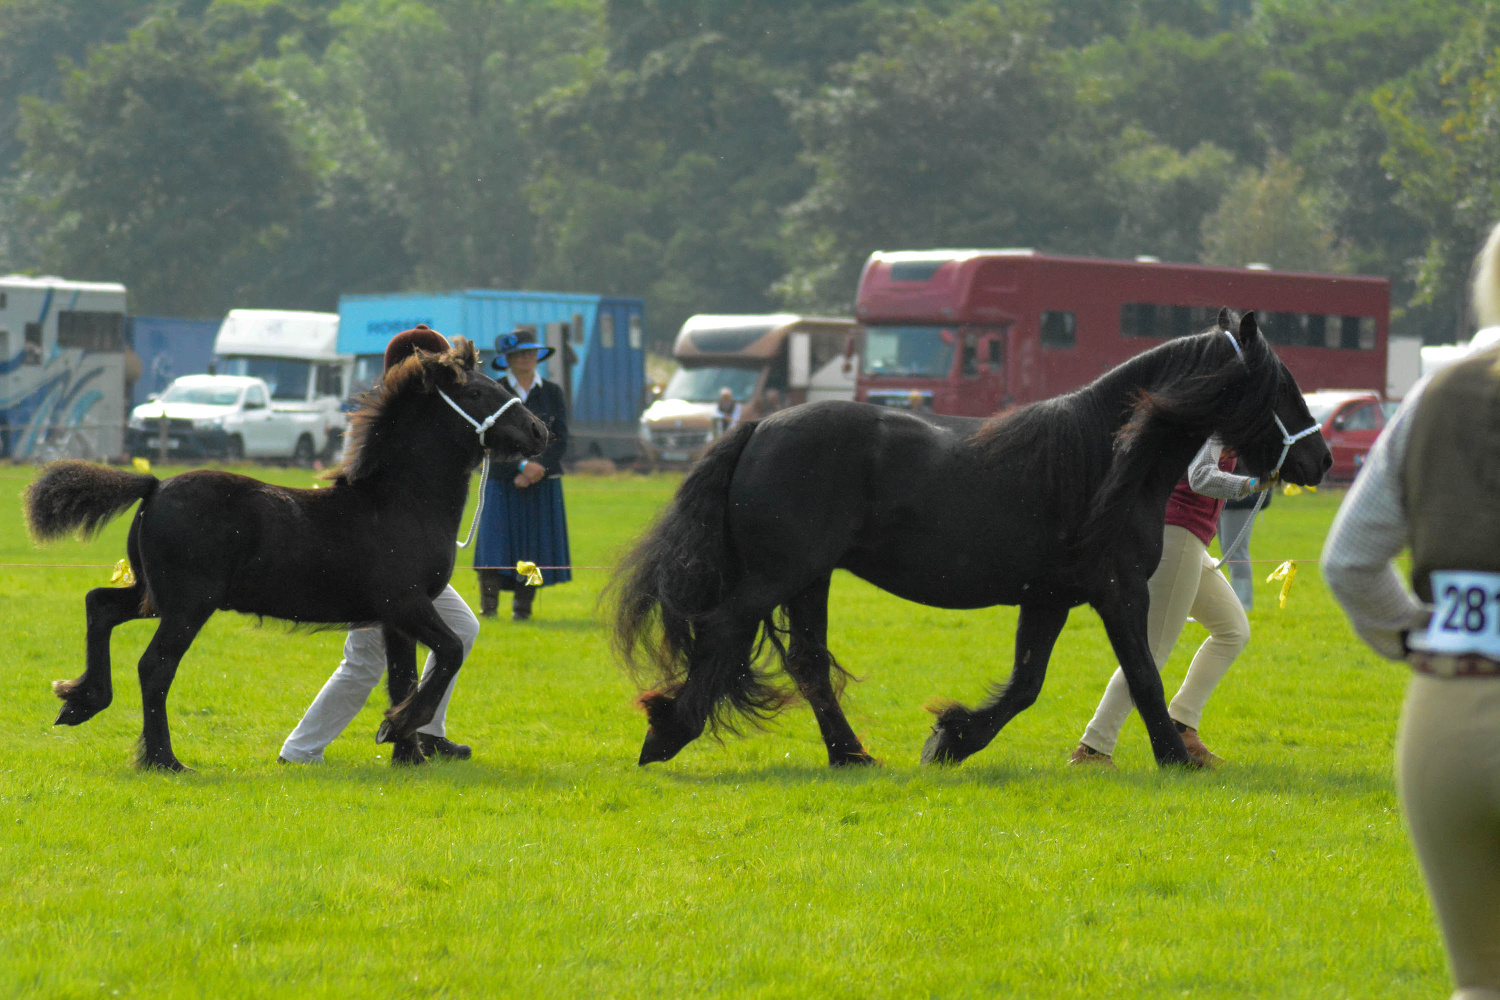 black mare and foal at a show in a green field